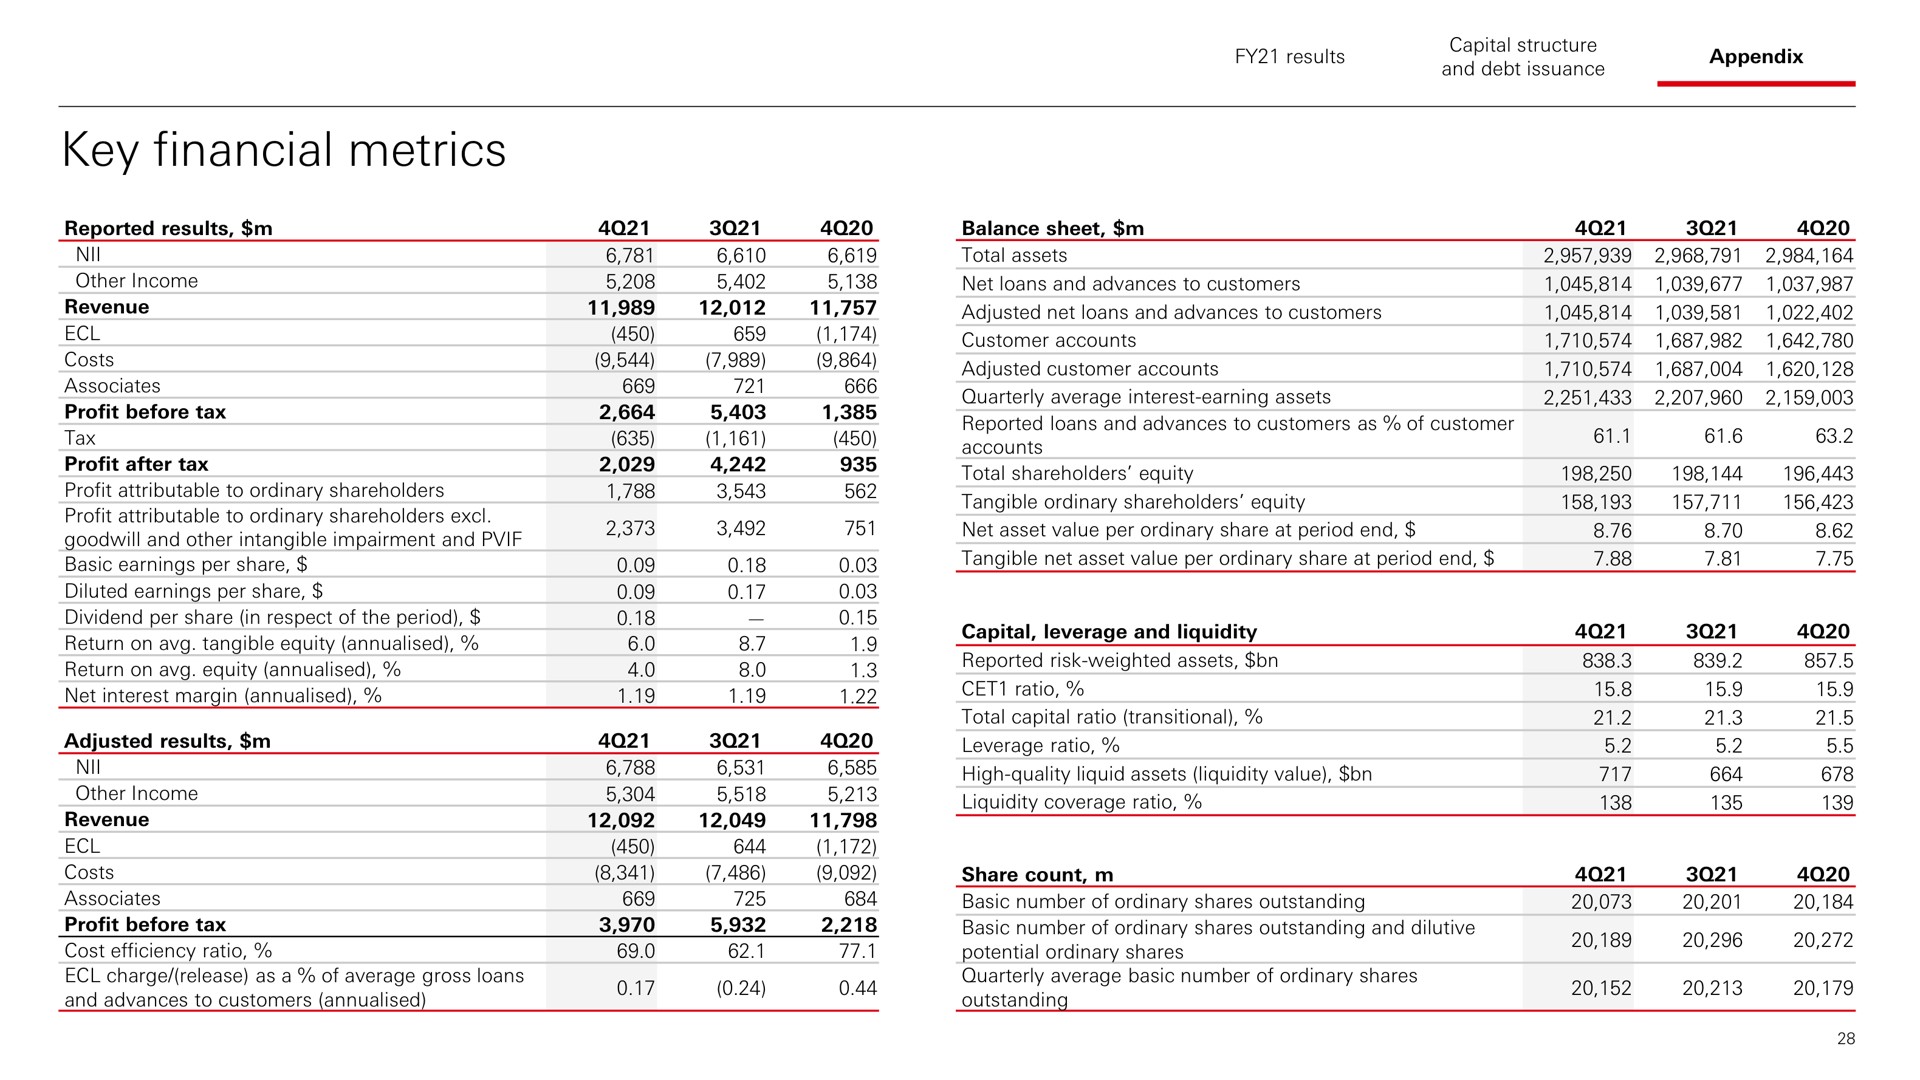 key financial metrics costs profit after tax shareholders dividend per share in respect of the period other income sees pee adjusted customer accounts total shareholders equity tangible ordinary shareholders equity capital leverage and liquidity liquidity coverage ratio | HSBC